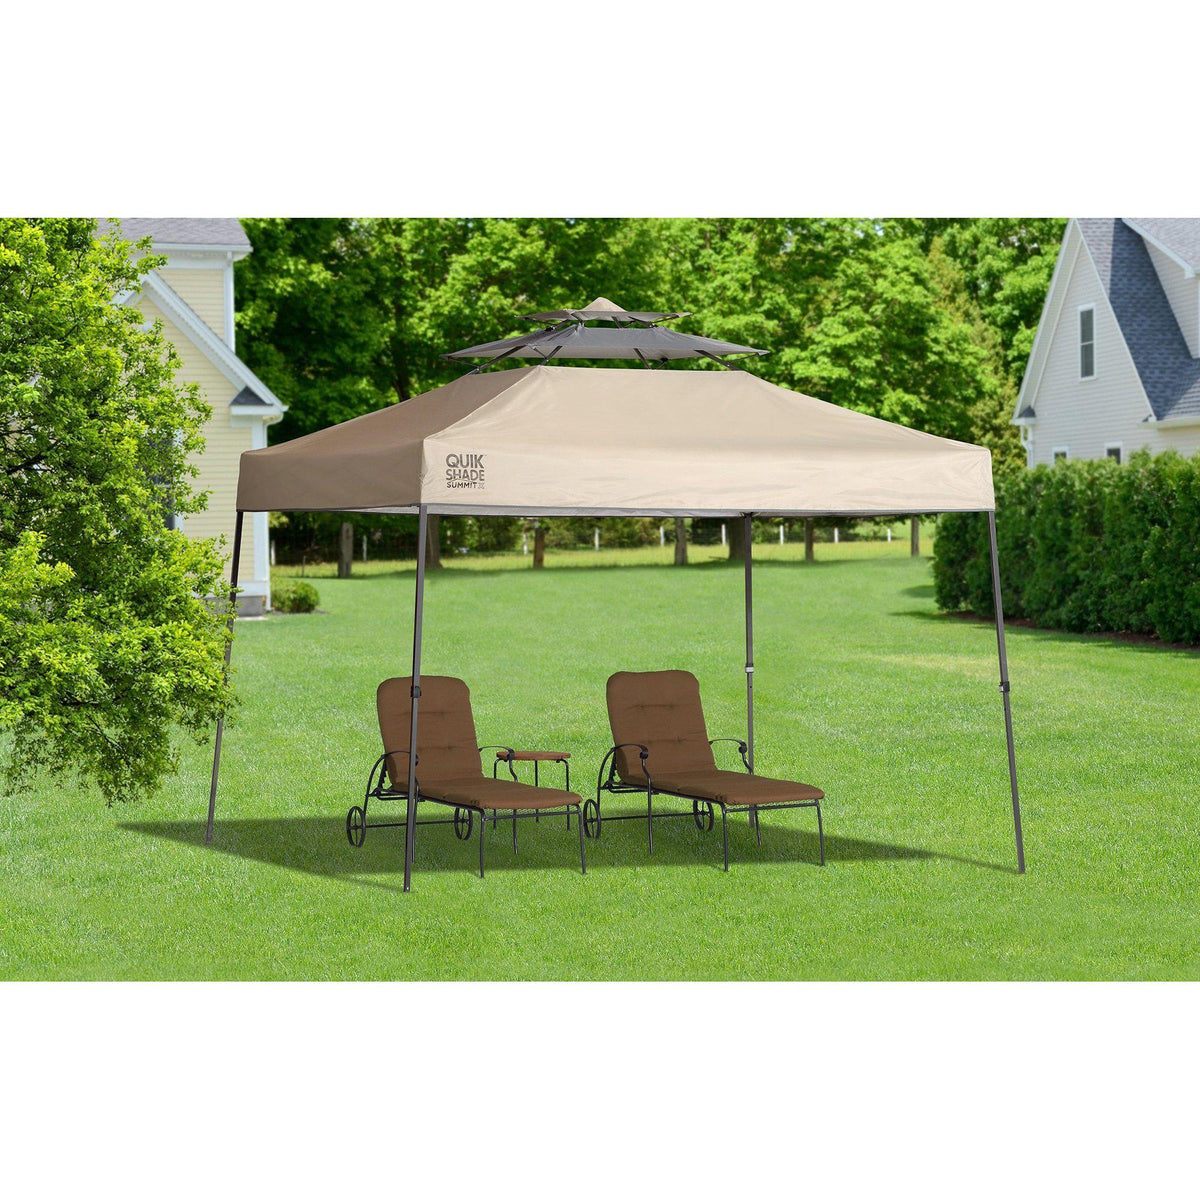 Quik Shade Summit 10 X 10 ft. Straight Leg Canopy, Taupe